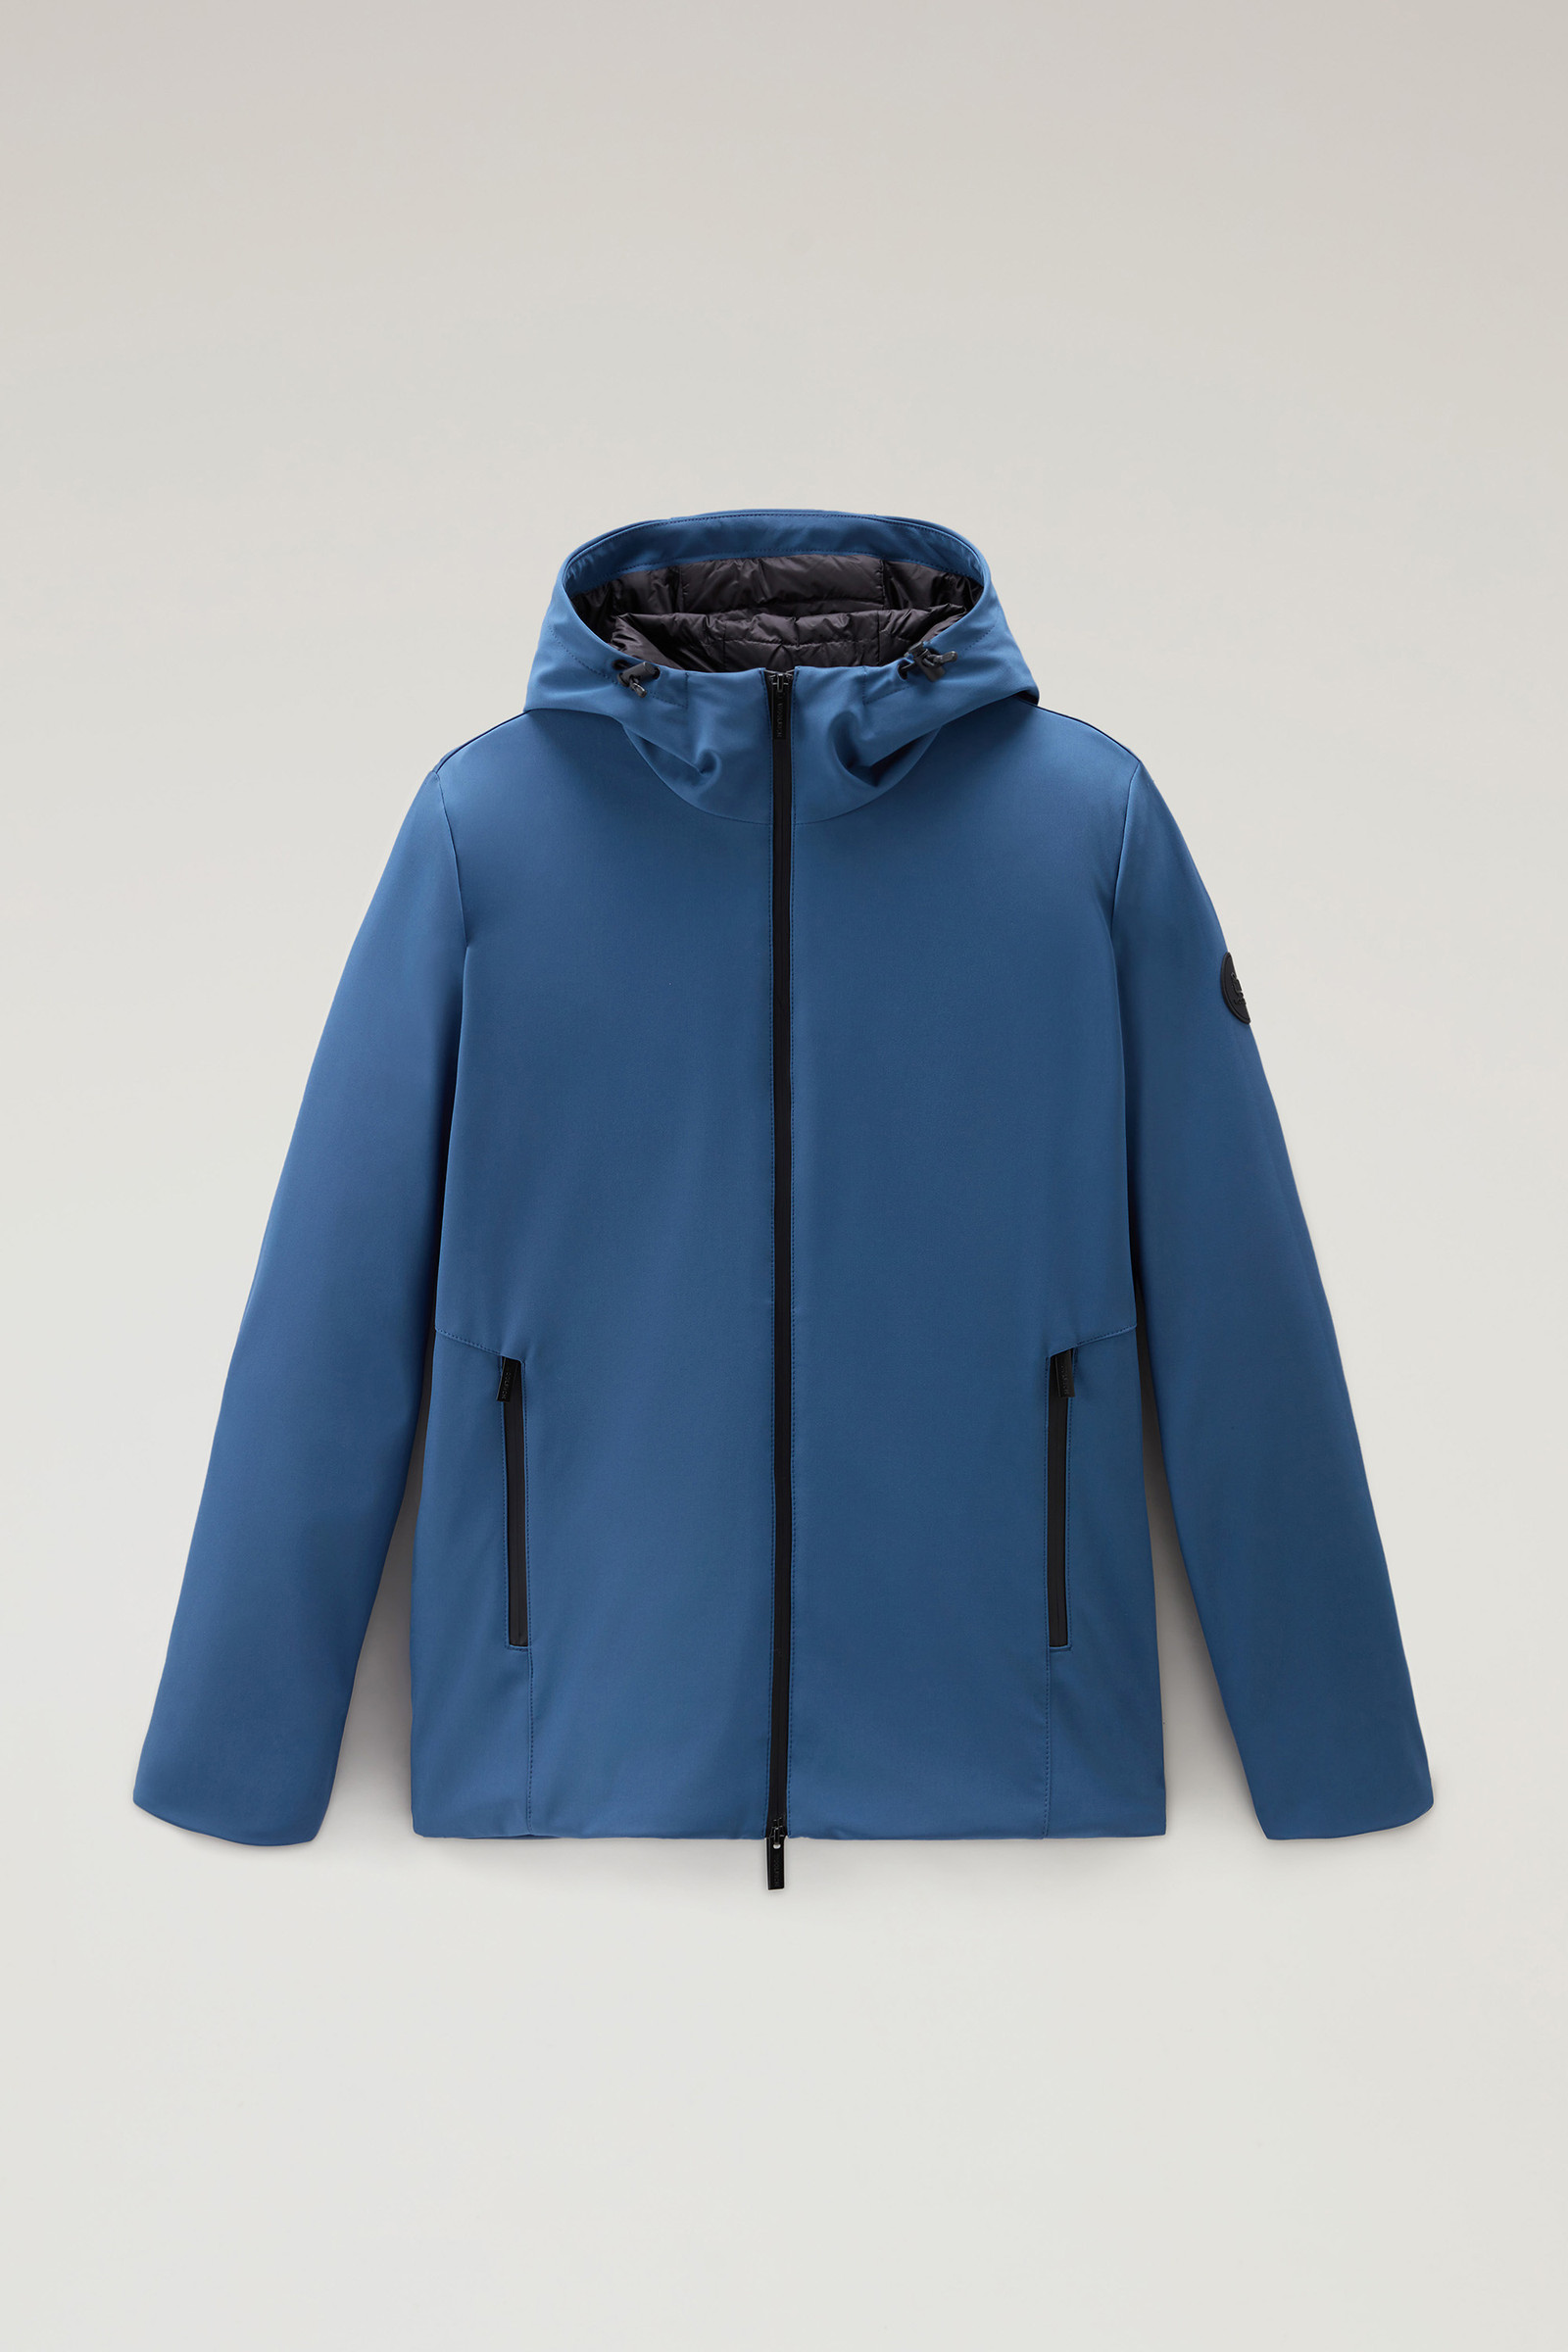 Pacific Jacket in Tech Softshell Blue | Woolrich USA